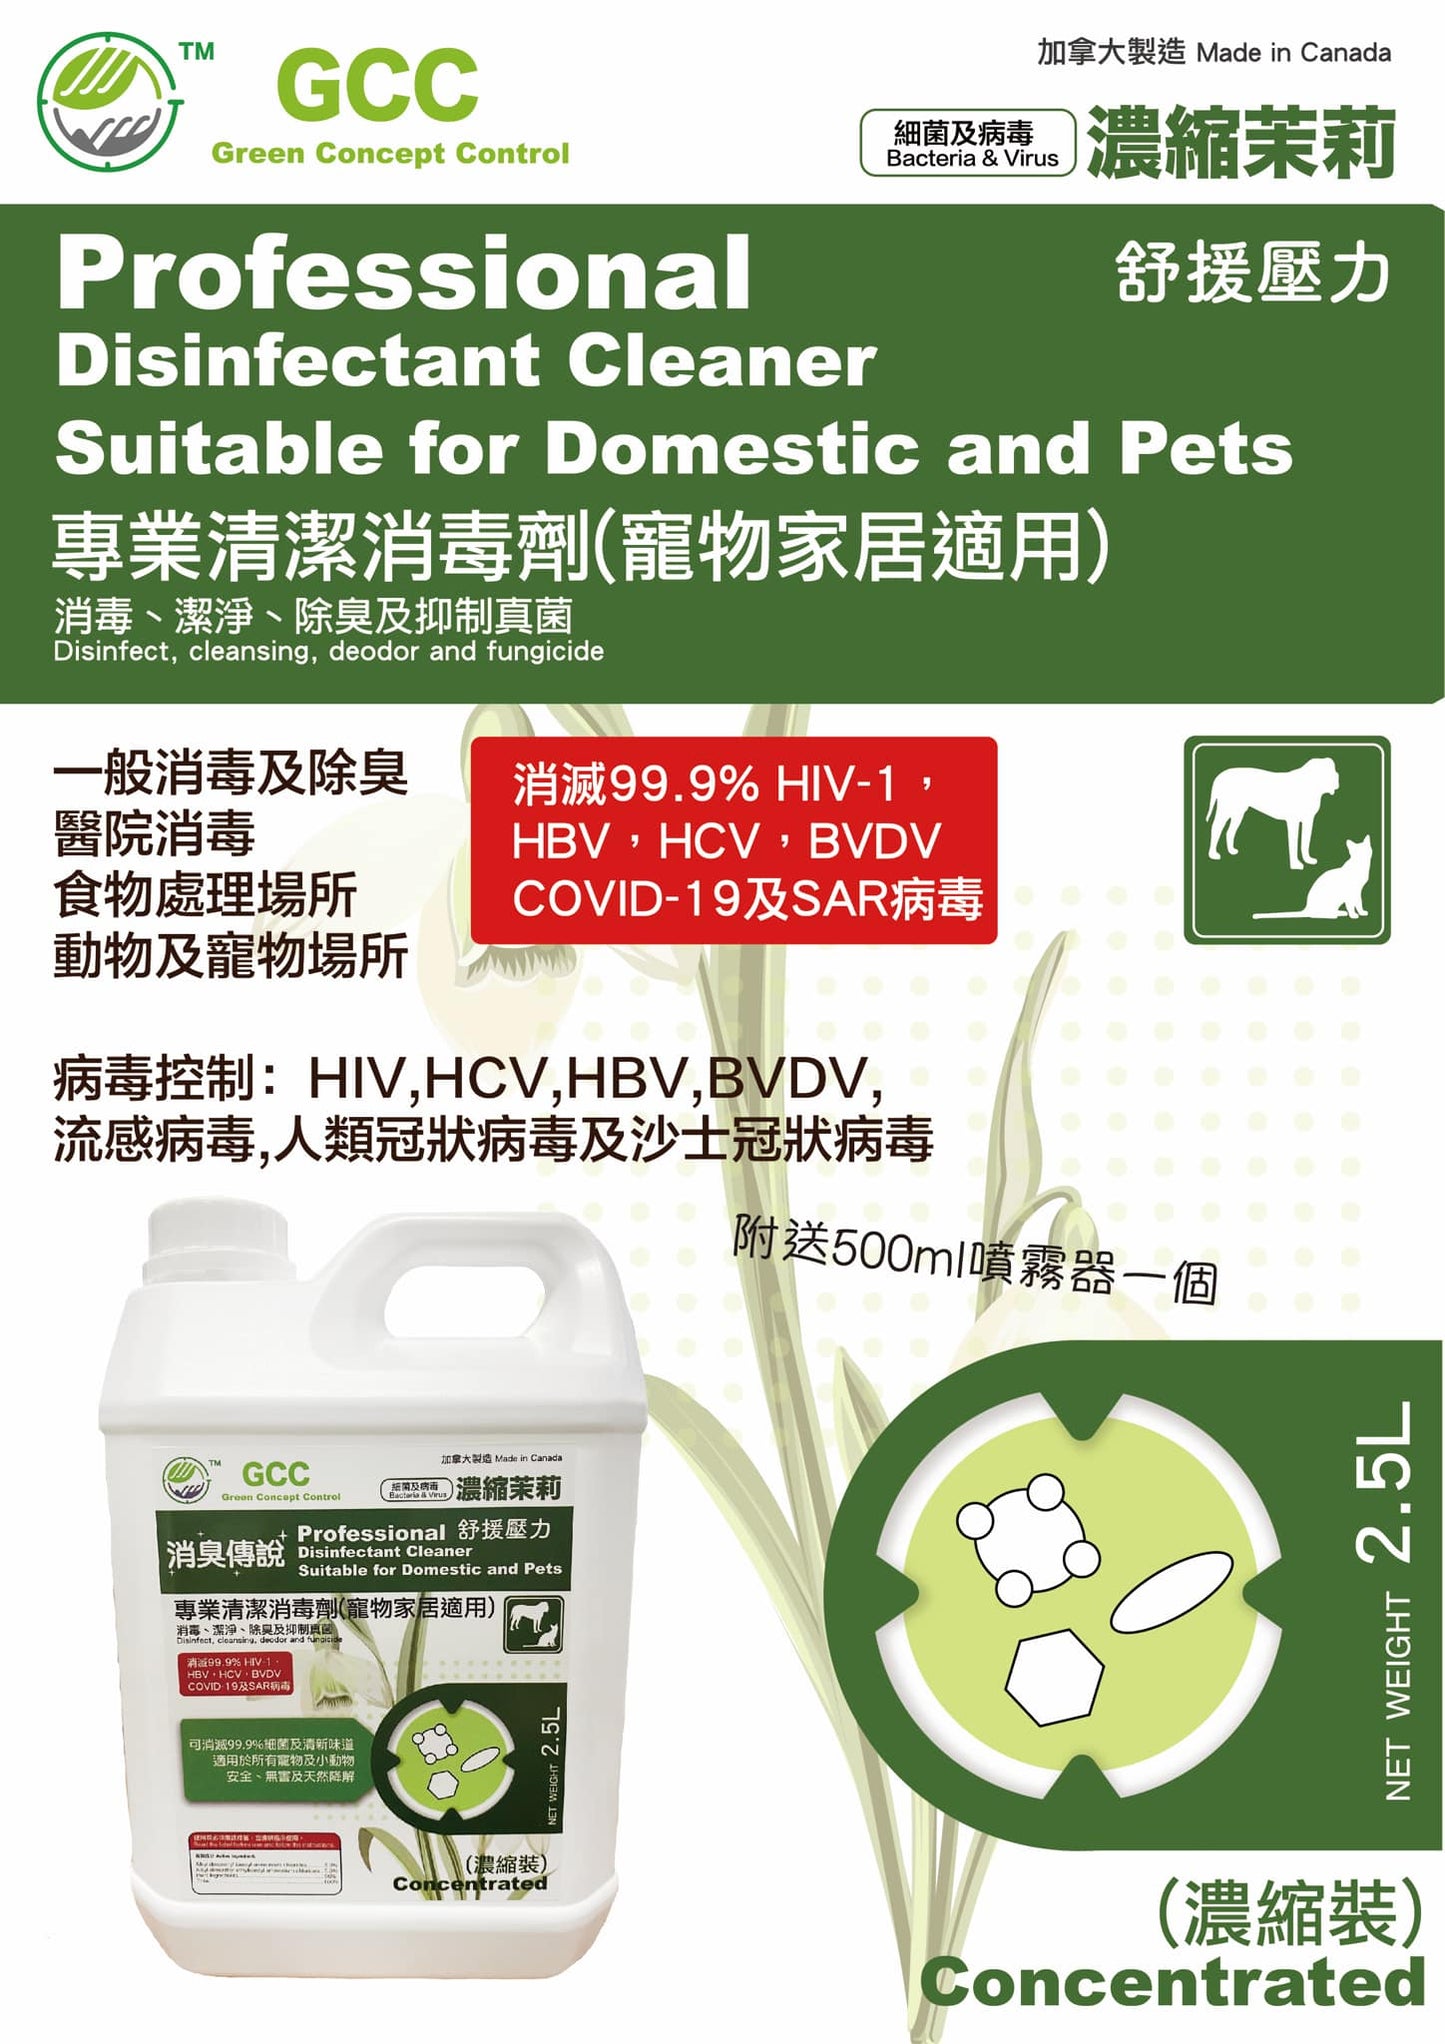 GCC ® professional cleaning disinfectant (pet home applicable) 2.5 L (liter) concentrated